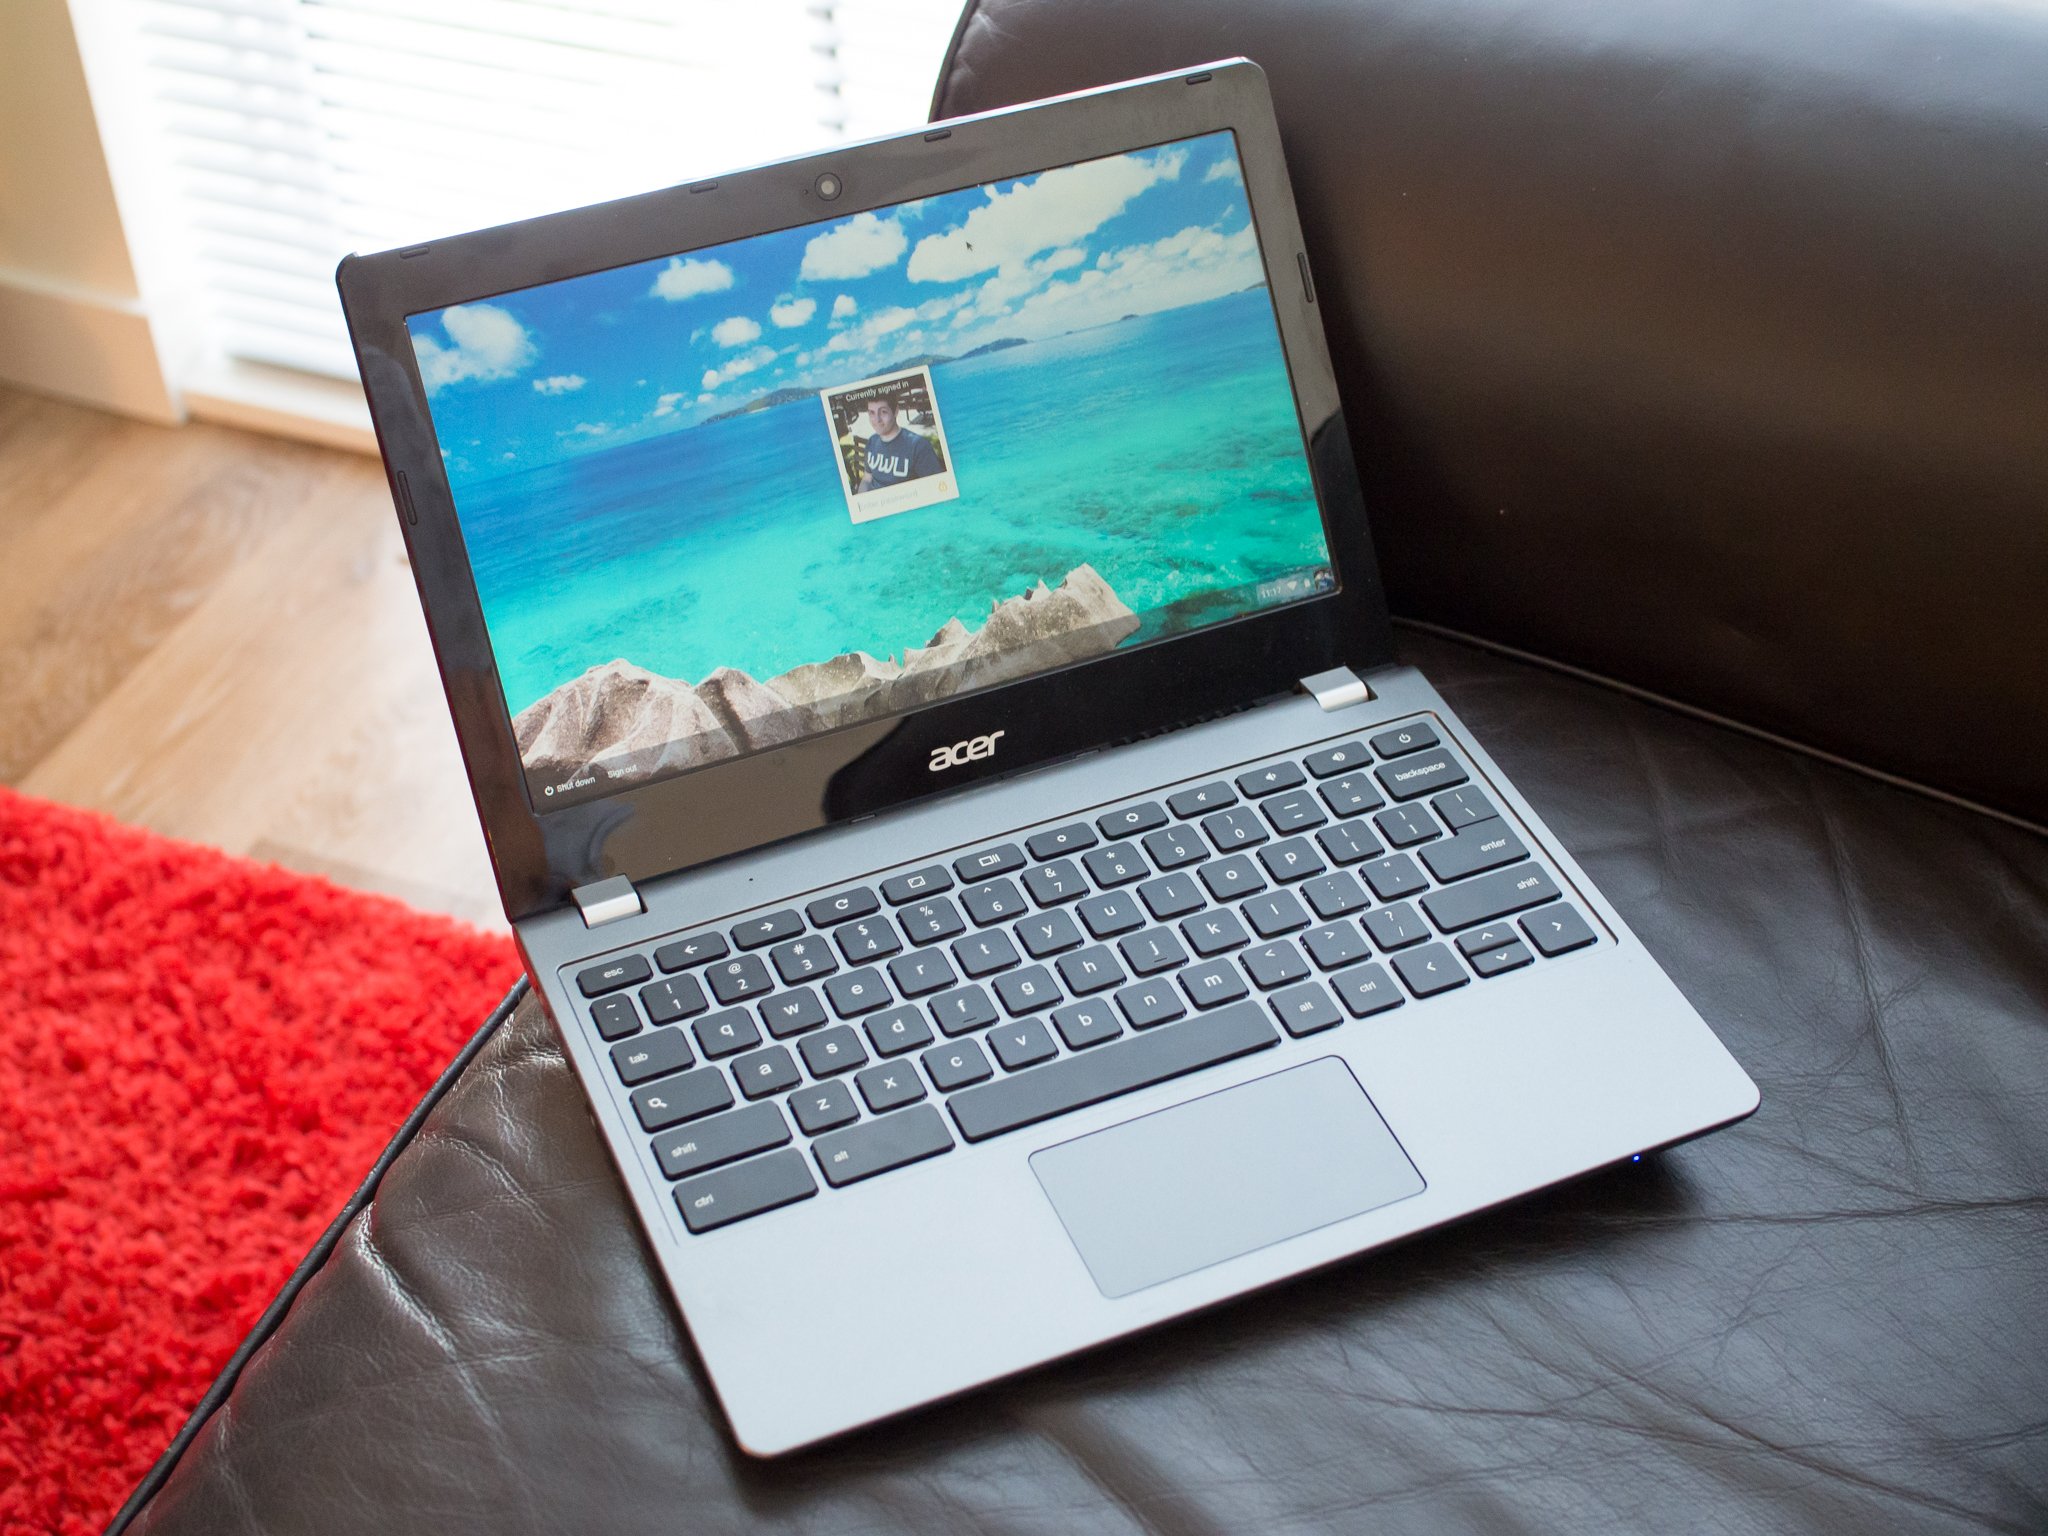 Chrome OS update lets you